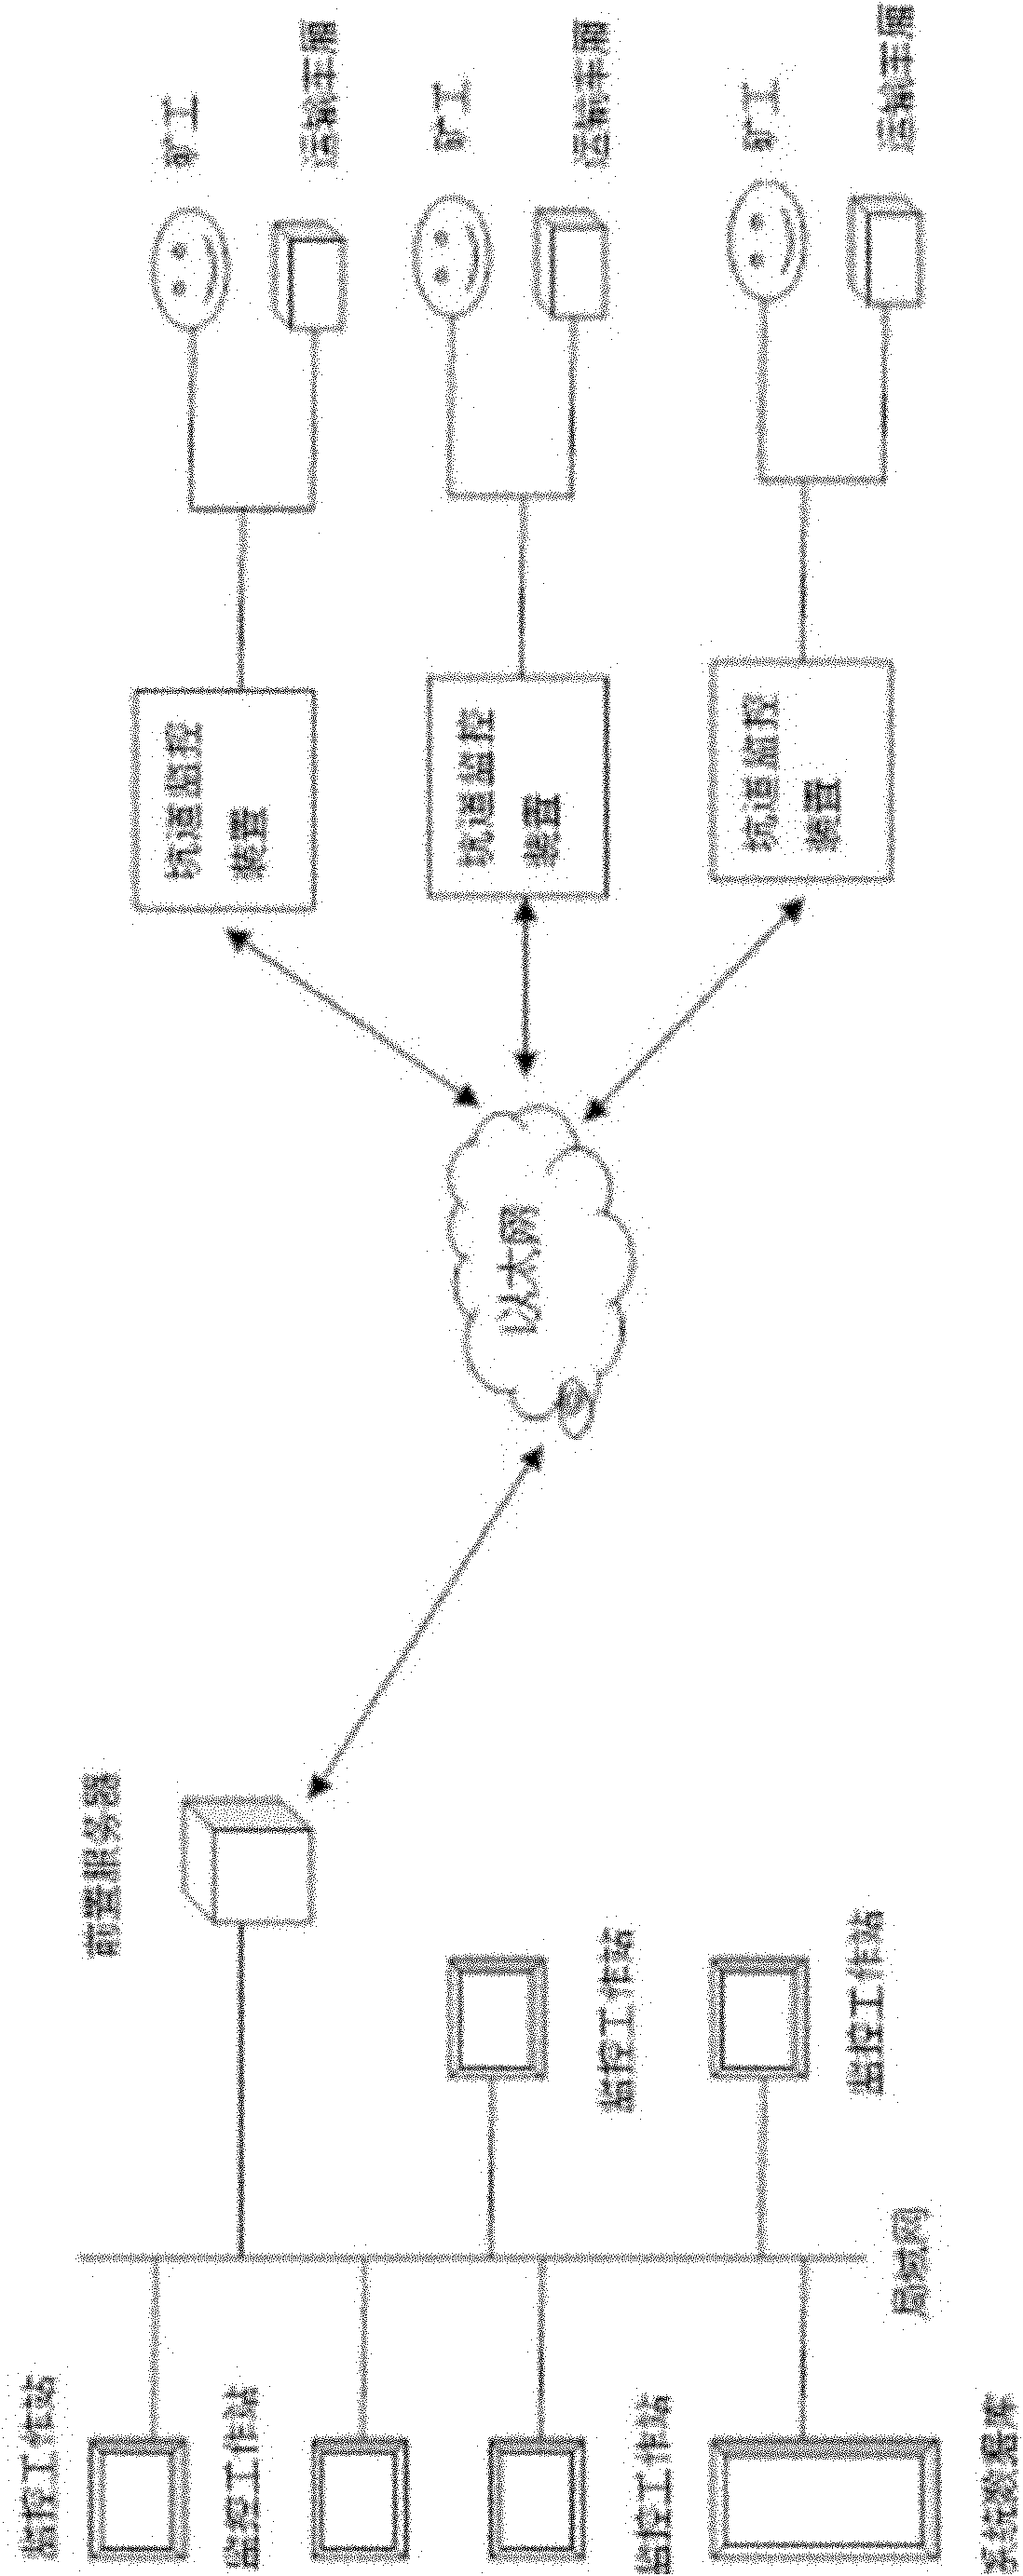 Underground personnel and material real-time online monitoring system and method for coal mine